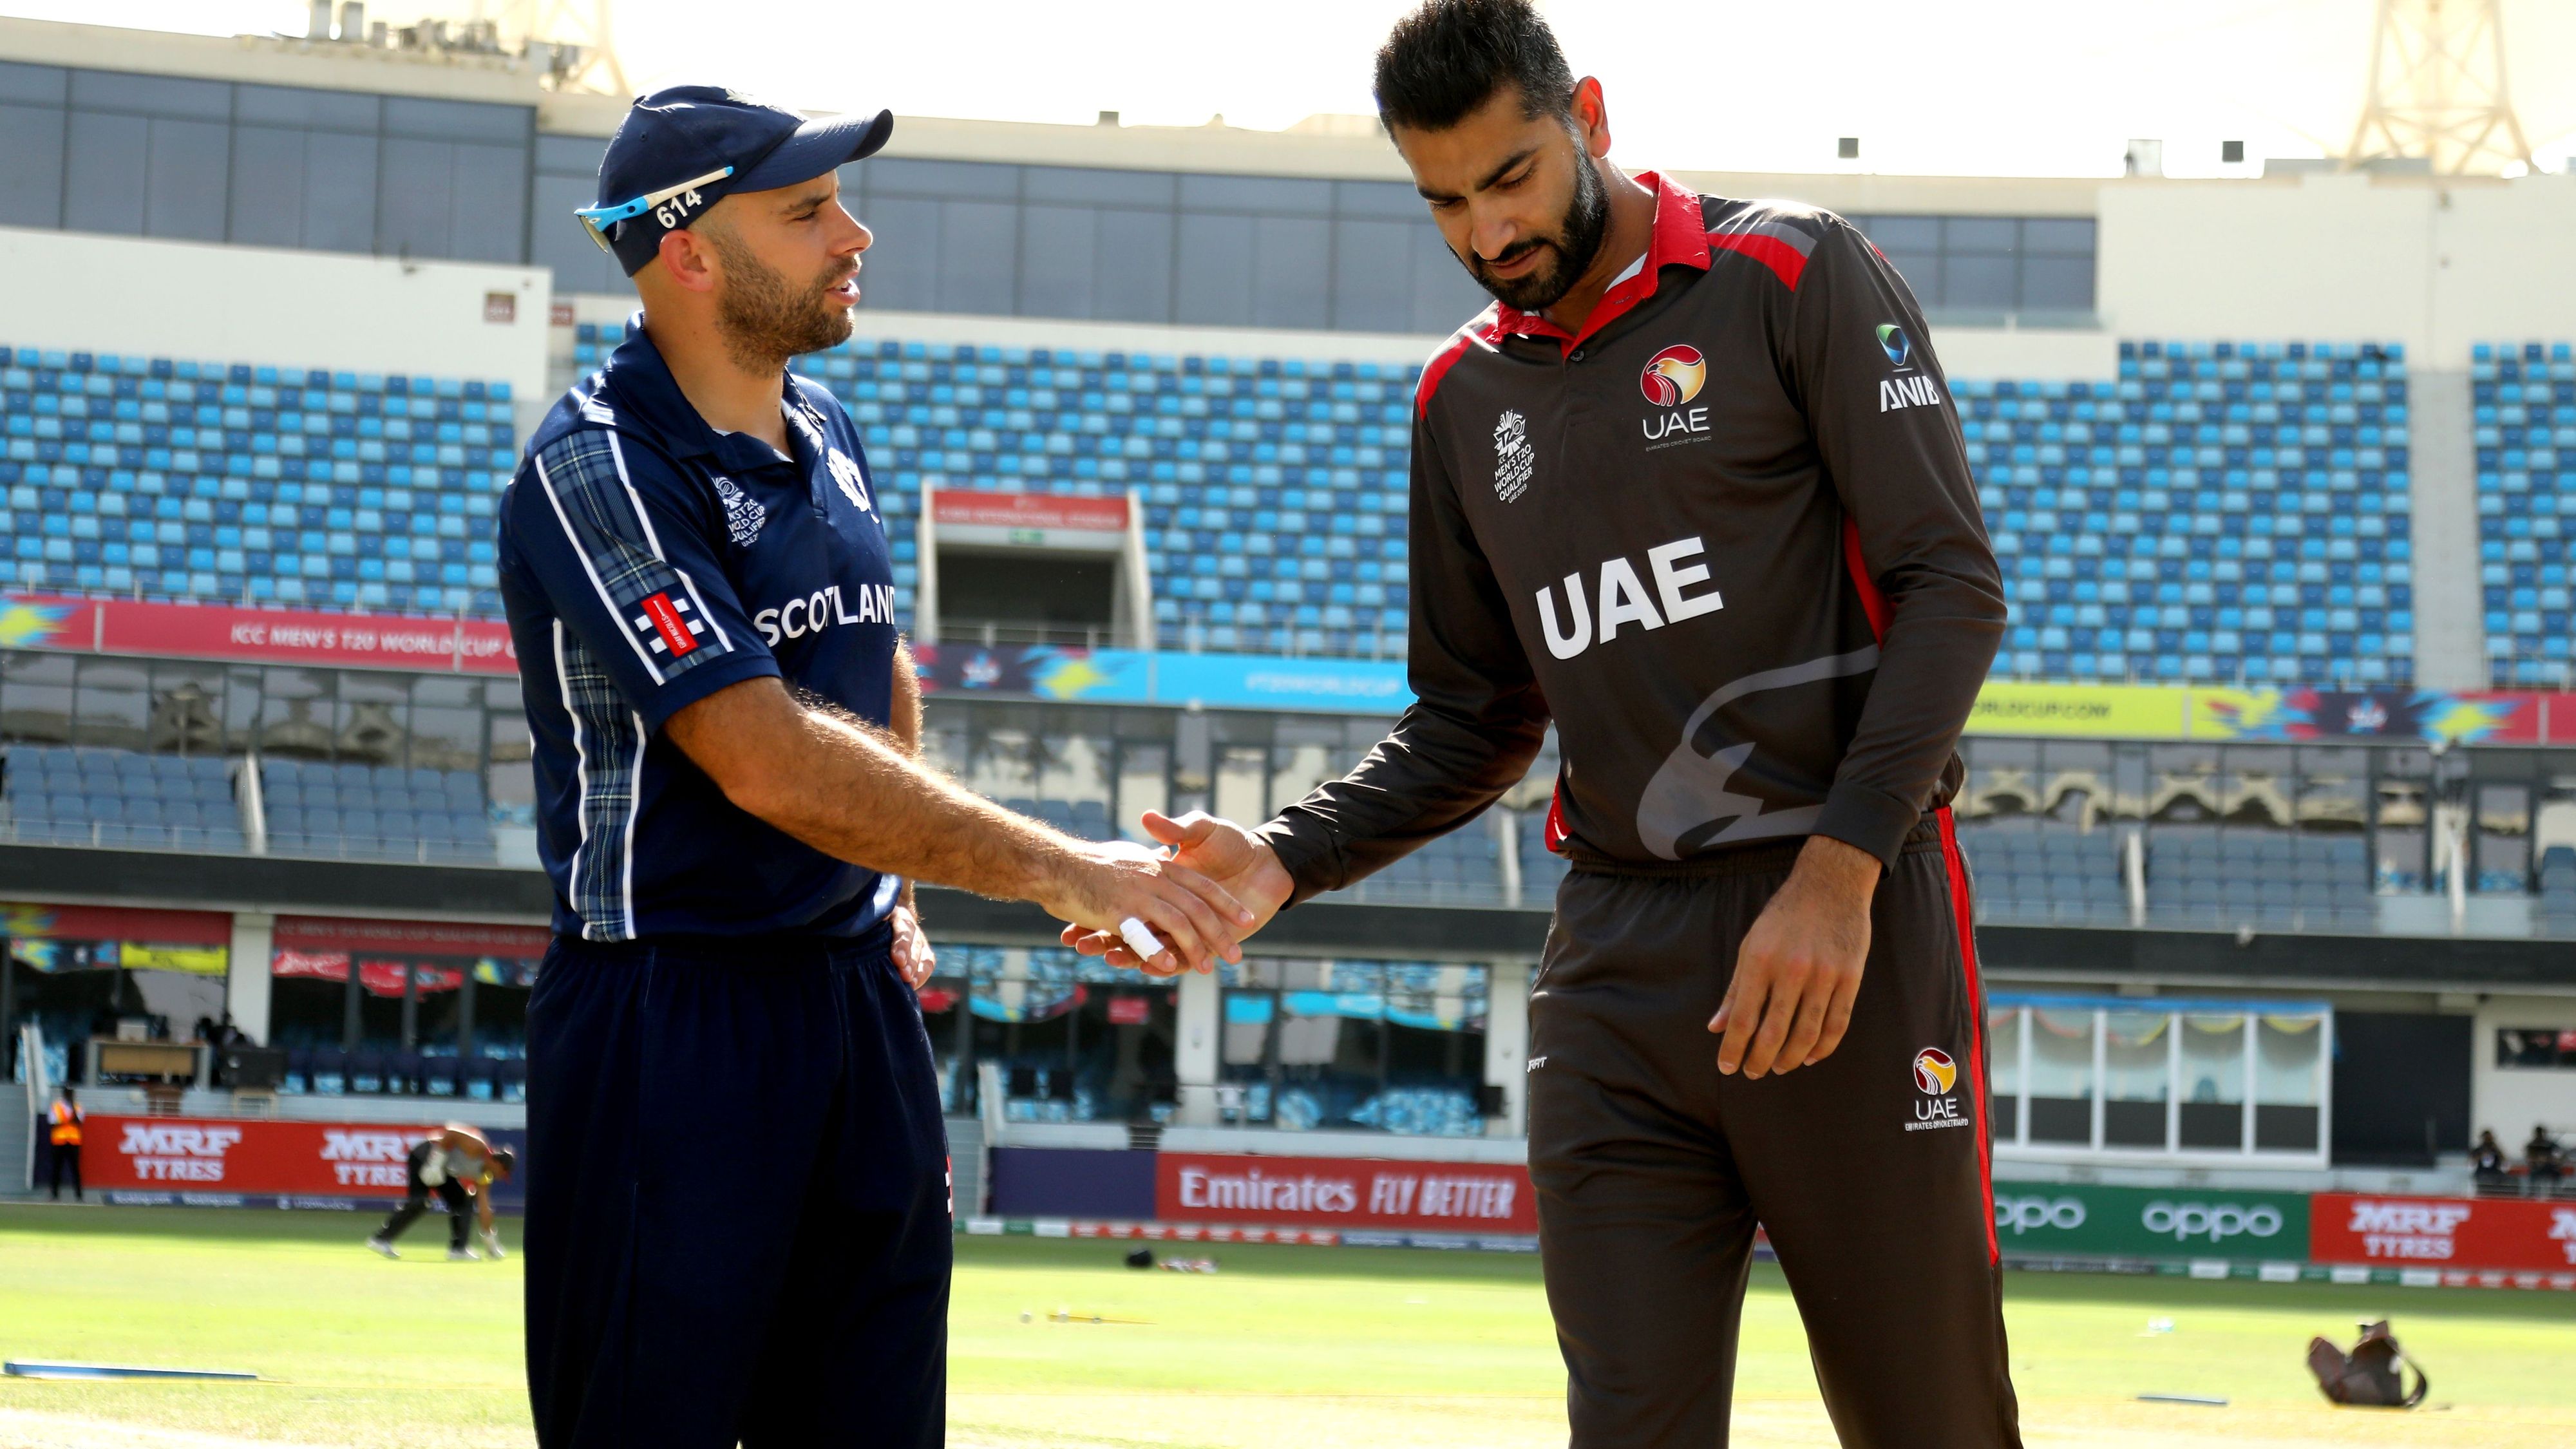 Fixtures announced for Scotland’s tour of UAE in December